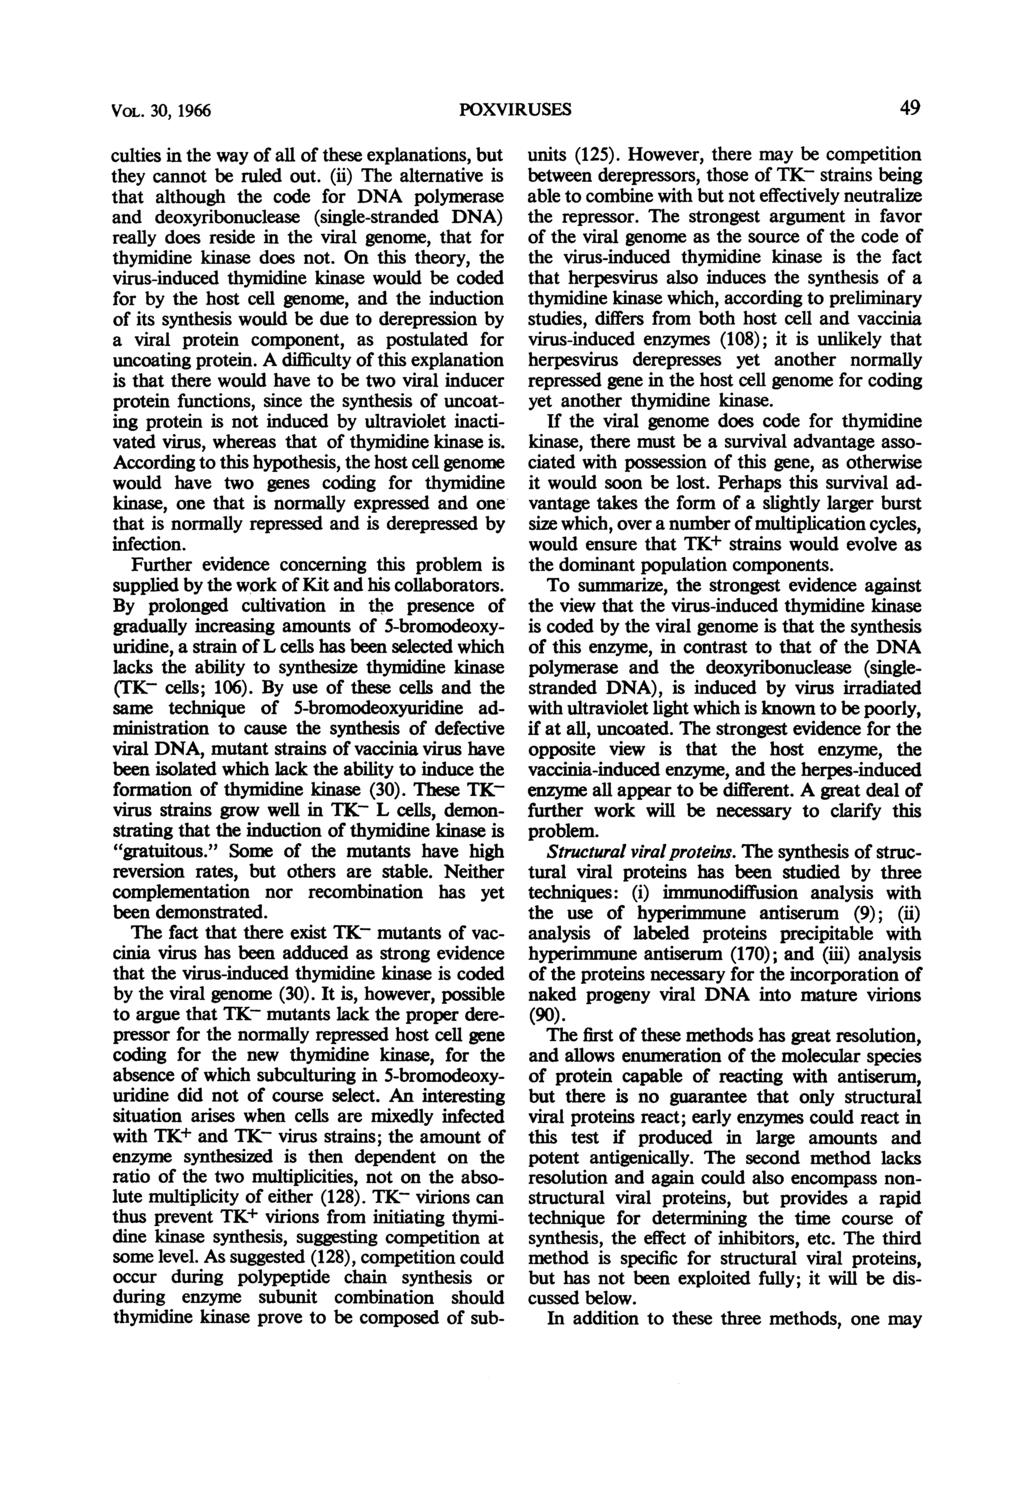 VOL. 30, 1966 POXVIRUSES culties in the way of all of these explanations, but they cannot be ruled out.